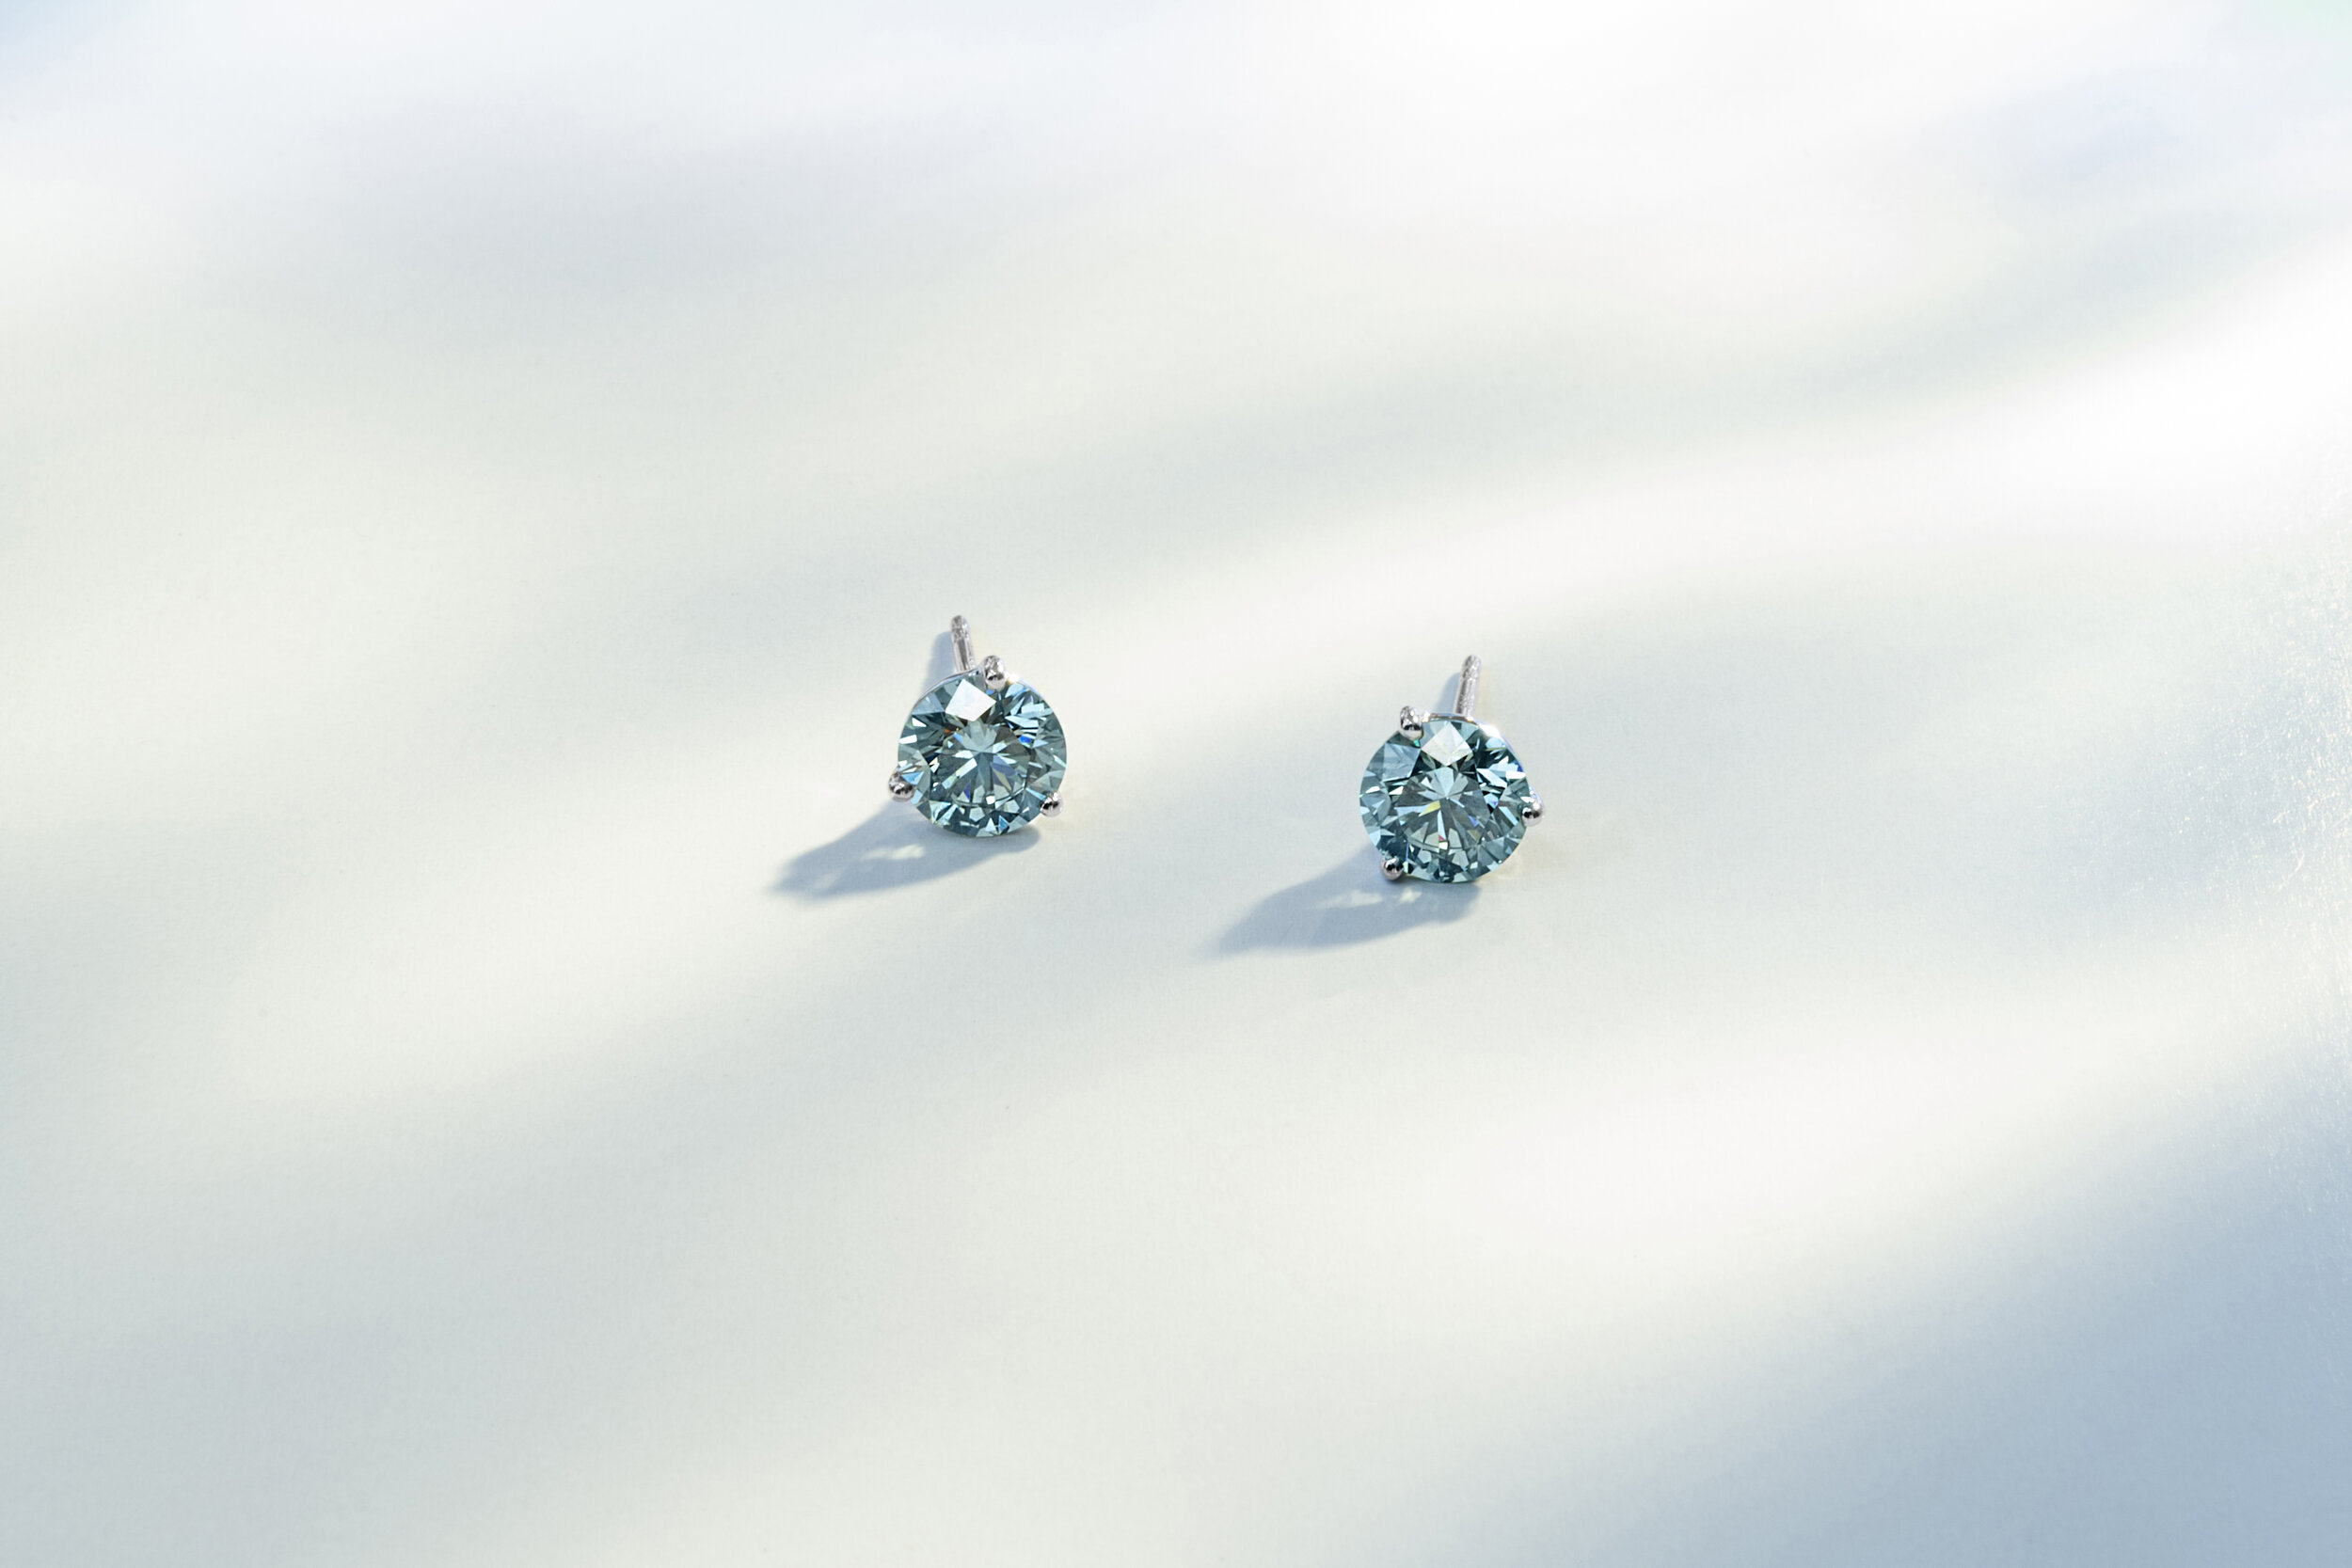 AHW_2786 - Lightbox Jewelry, photo by Andrew Werner.jpg